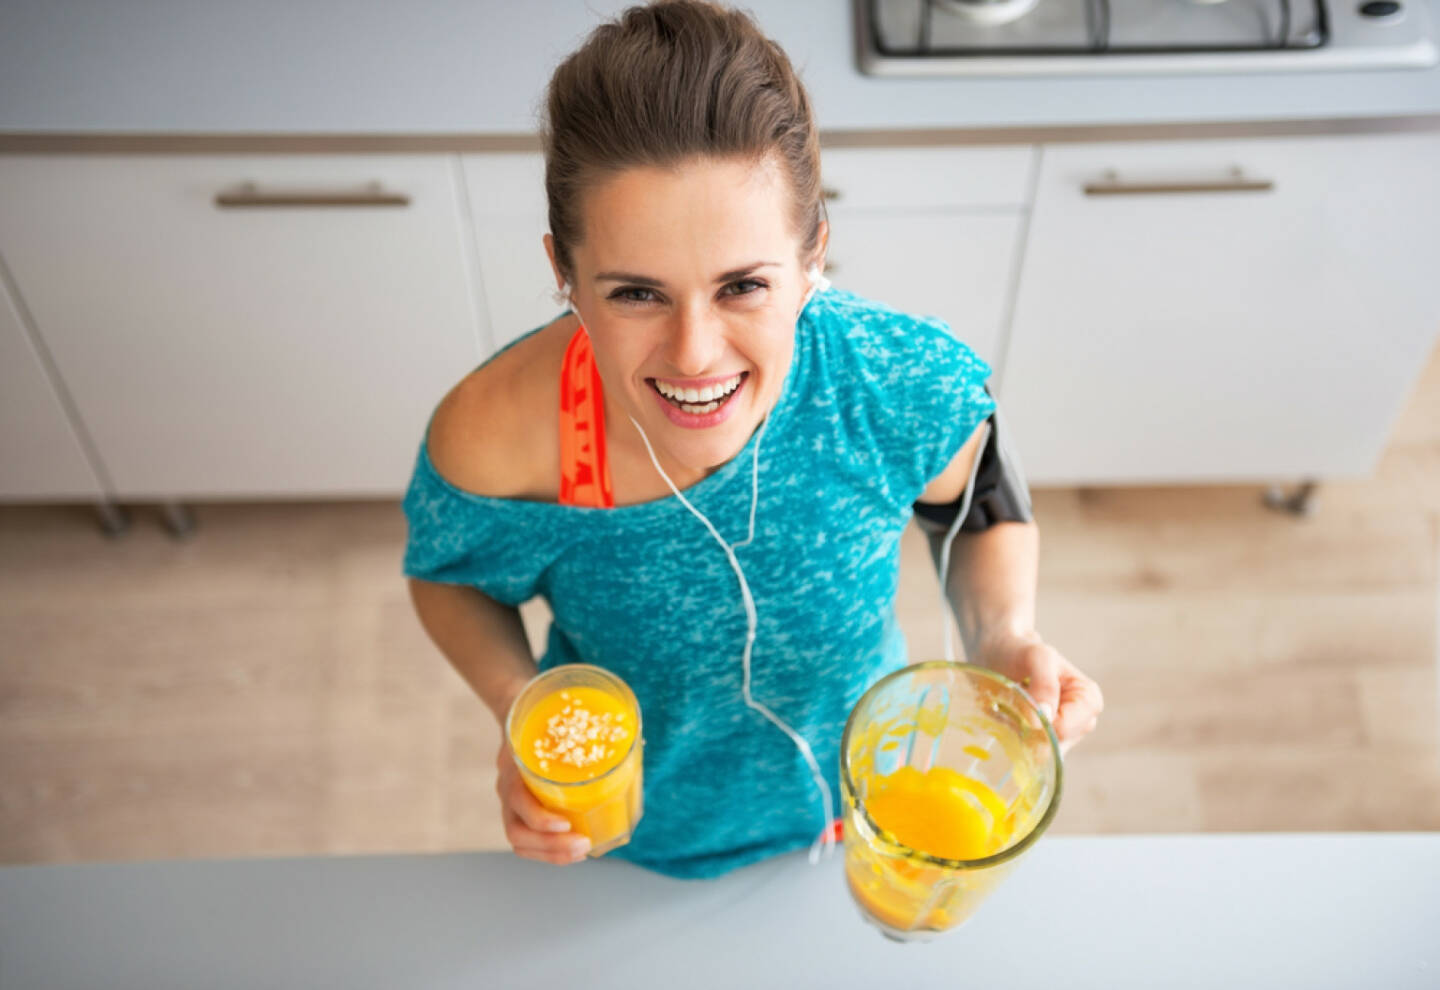 Runplugged, plugged, Musik, hören, Kopfhörer, Smoothie, http://www.shutterstock.com/de/pic-247502278/stock-photo-portrait-of-happy-fitness-young-woman-with-pumpkin-smoothie-in-kitchen.html